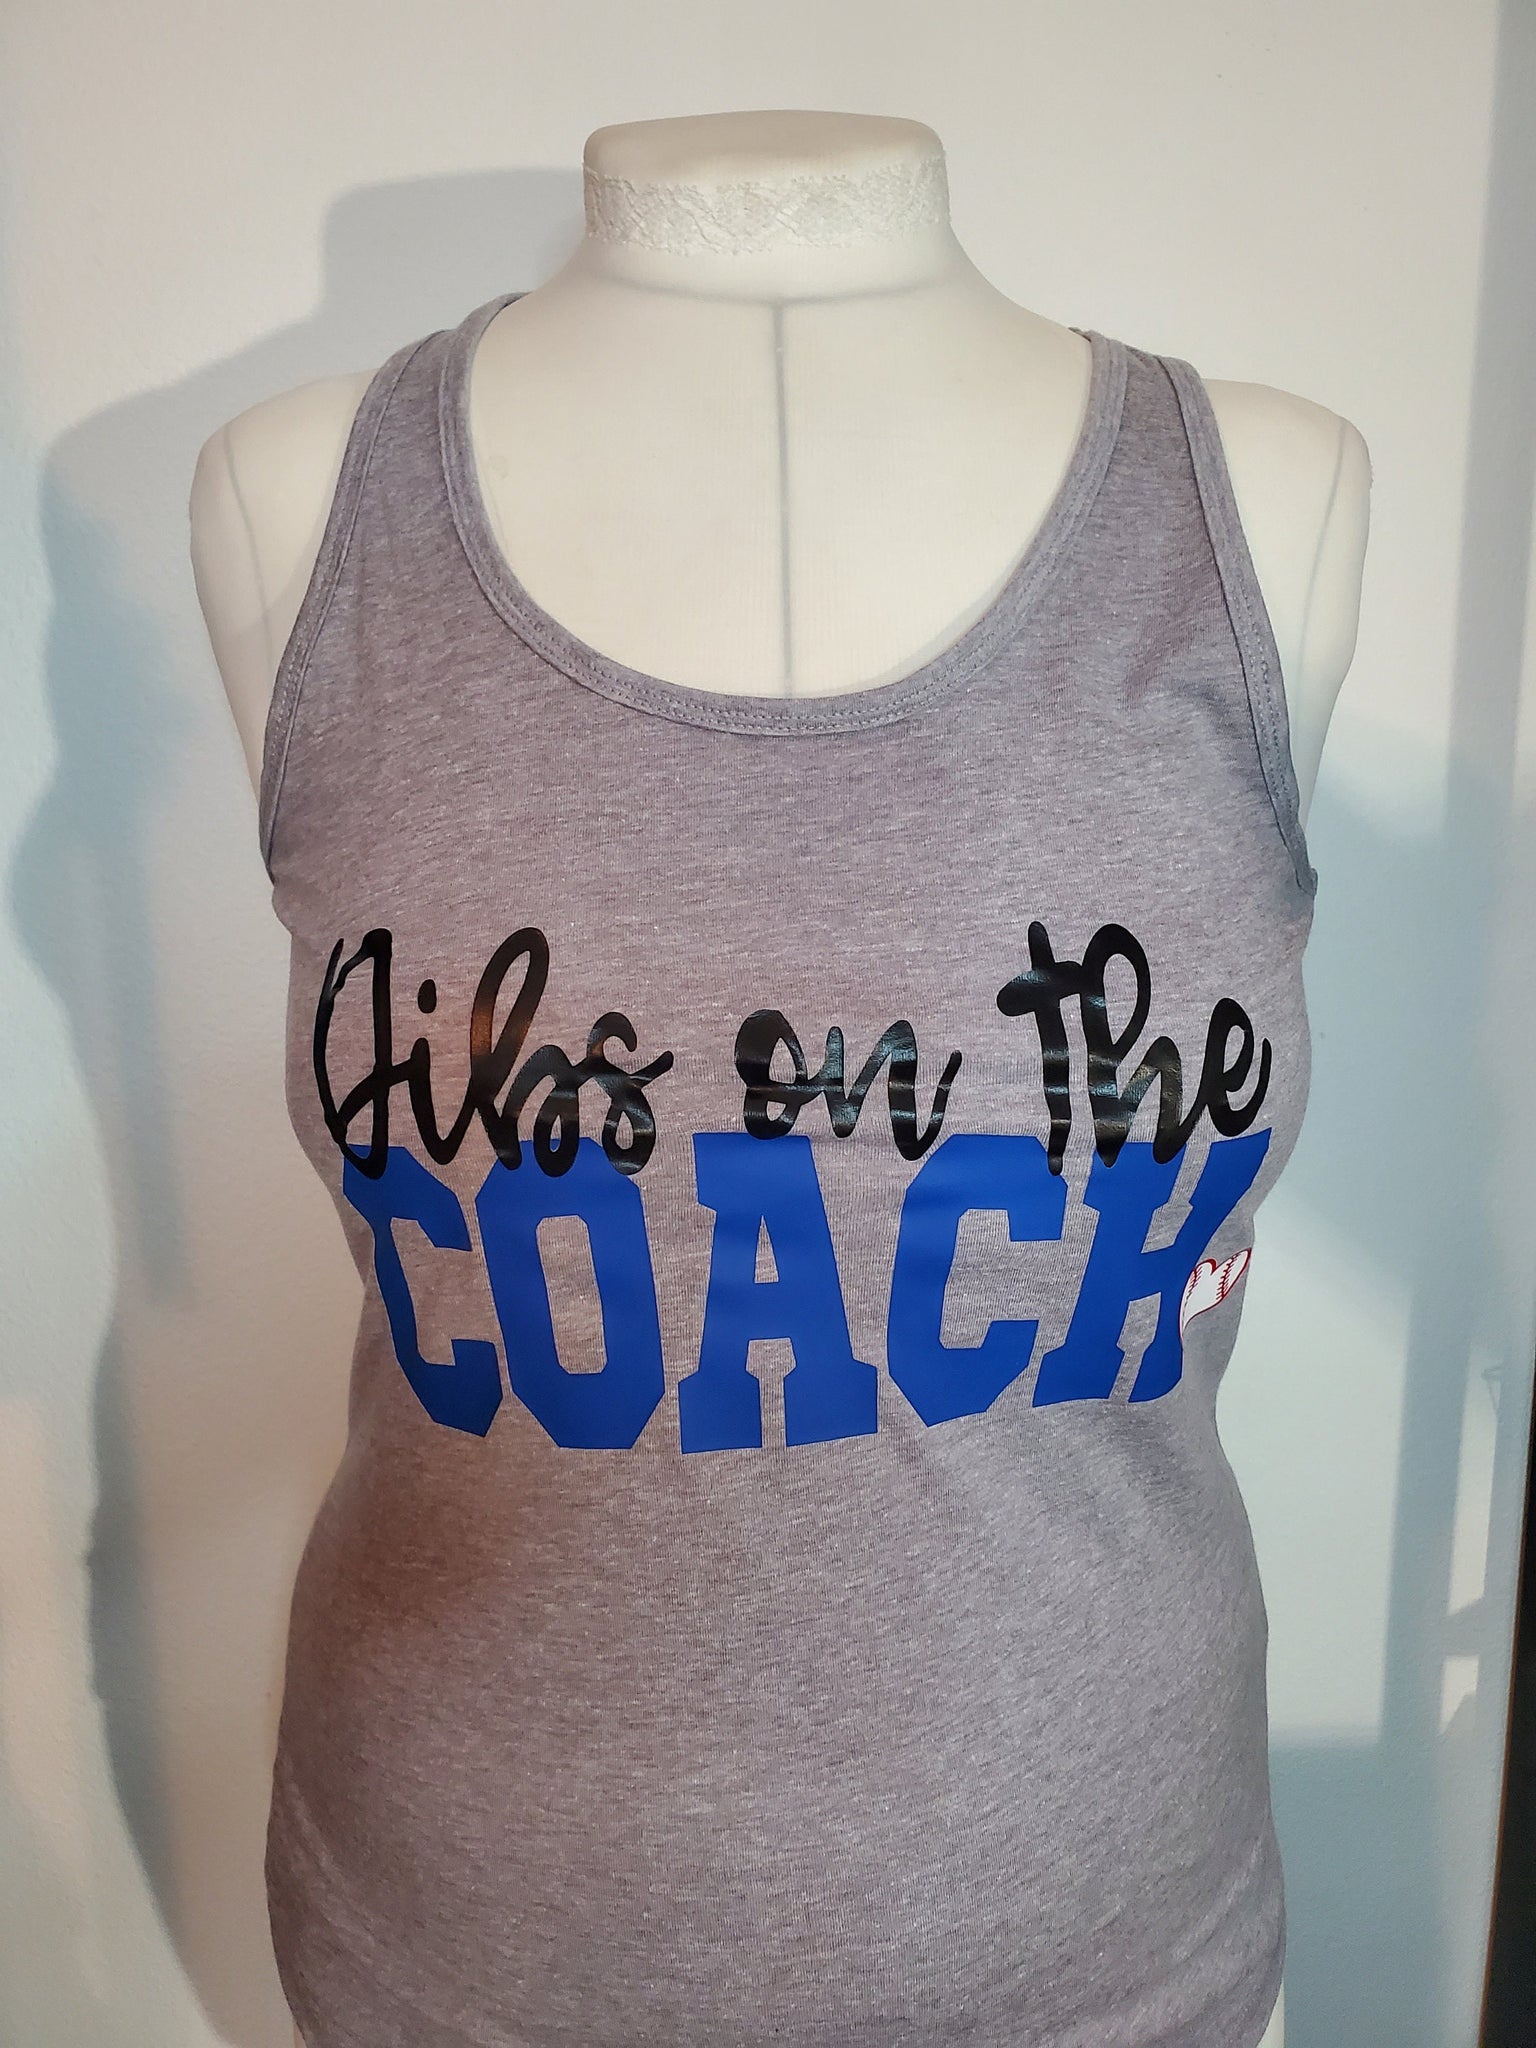 Dibs on the Coach T-shirt – Purposely Printed